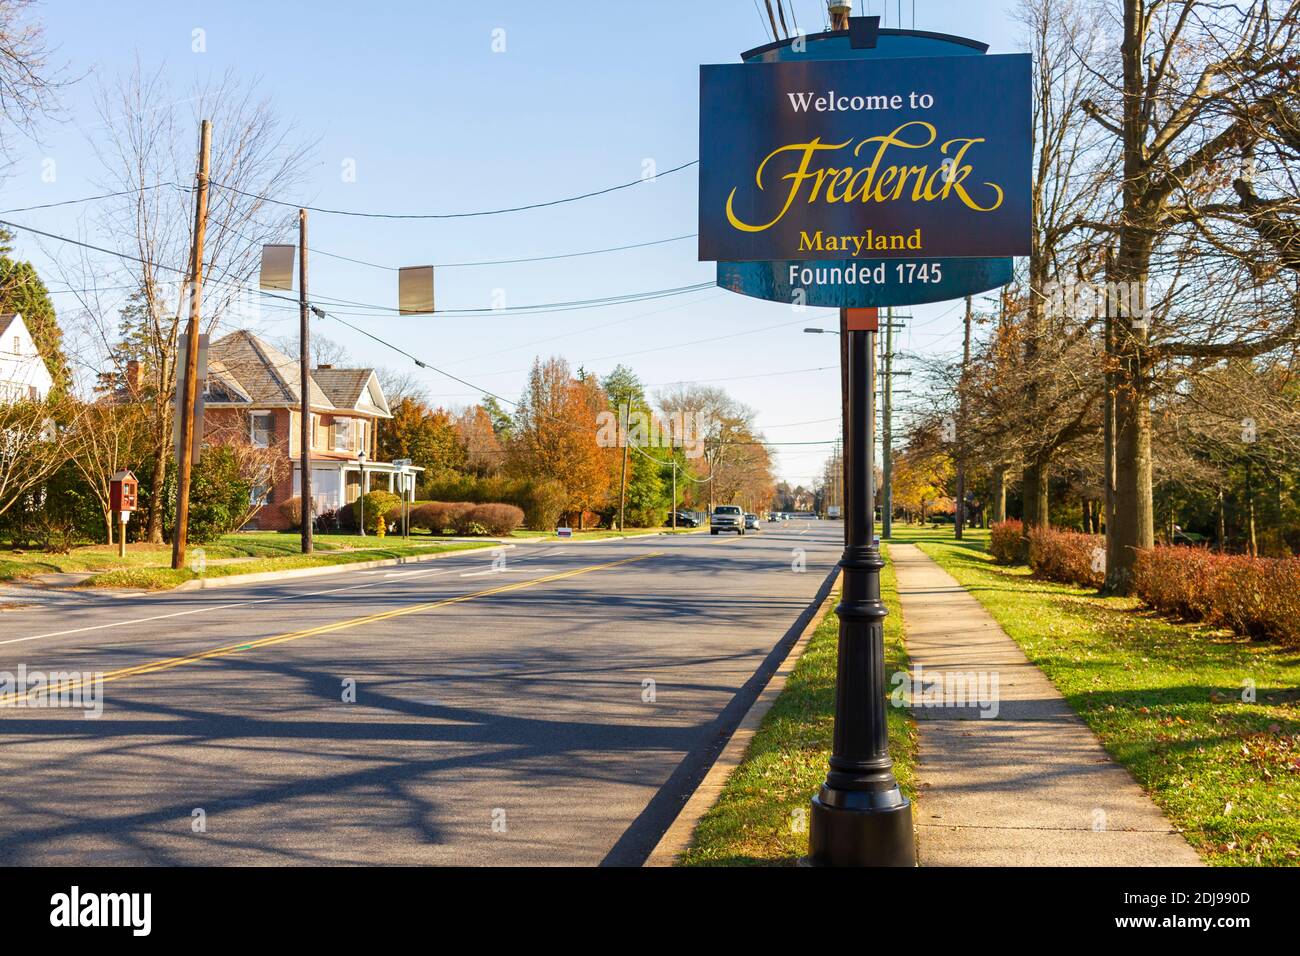 Frederick, MD, USA 11-24-2020: Welcome to Frederick sign at the outskirts of the city. Founded in 1745 this historic Maryland town is  seat of Frederi Stock Photo